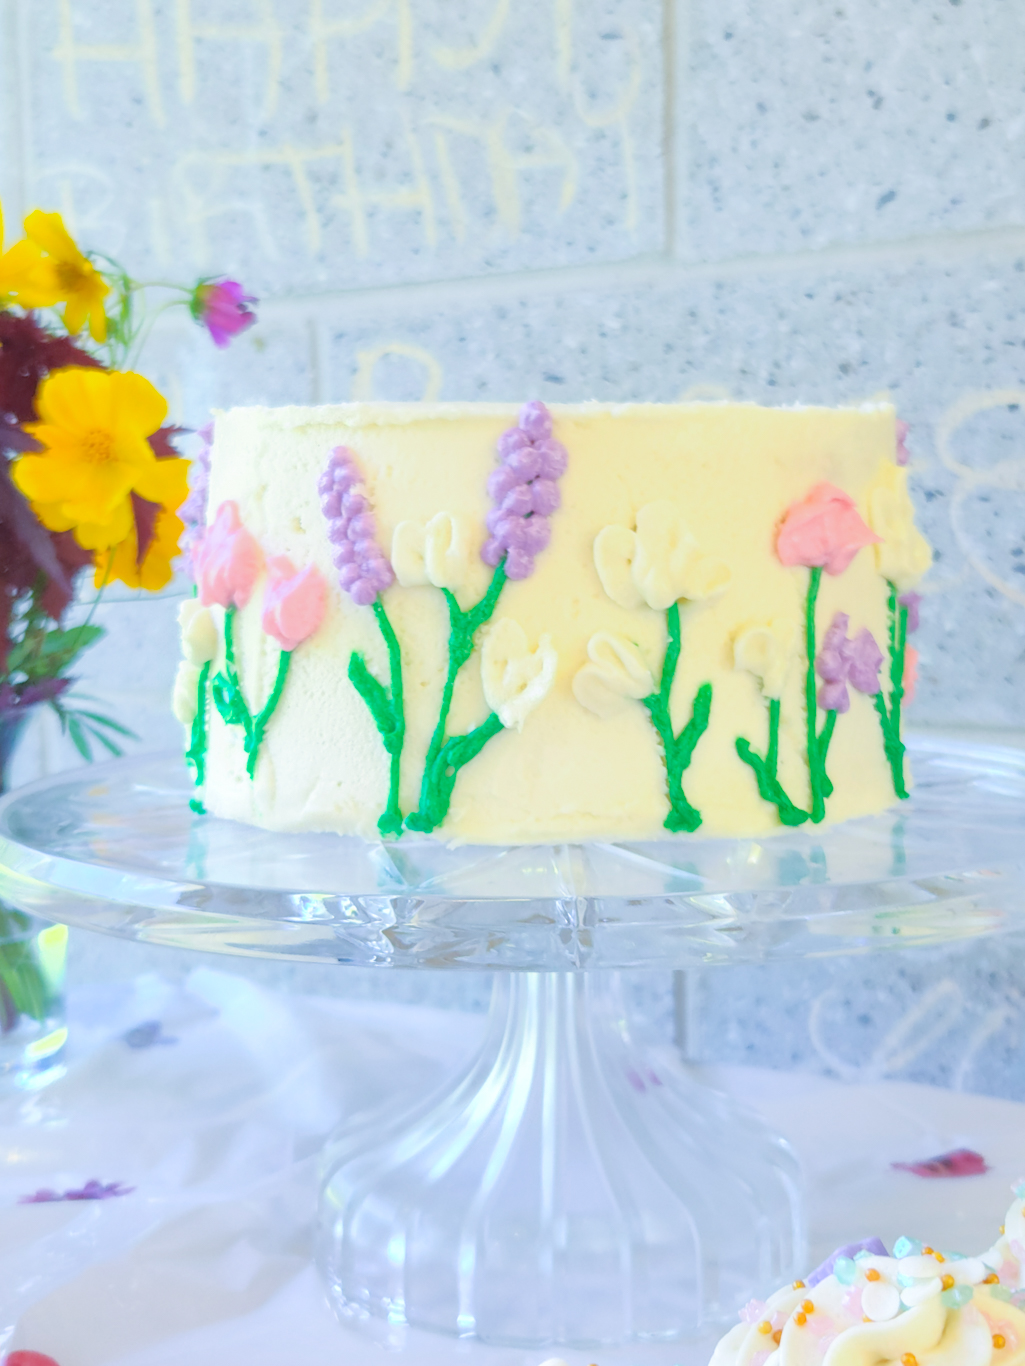 Wildflower smash cake set against a backdrop of real wildflowers and birthday decorations.